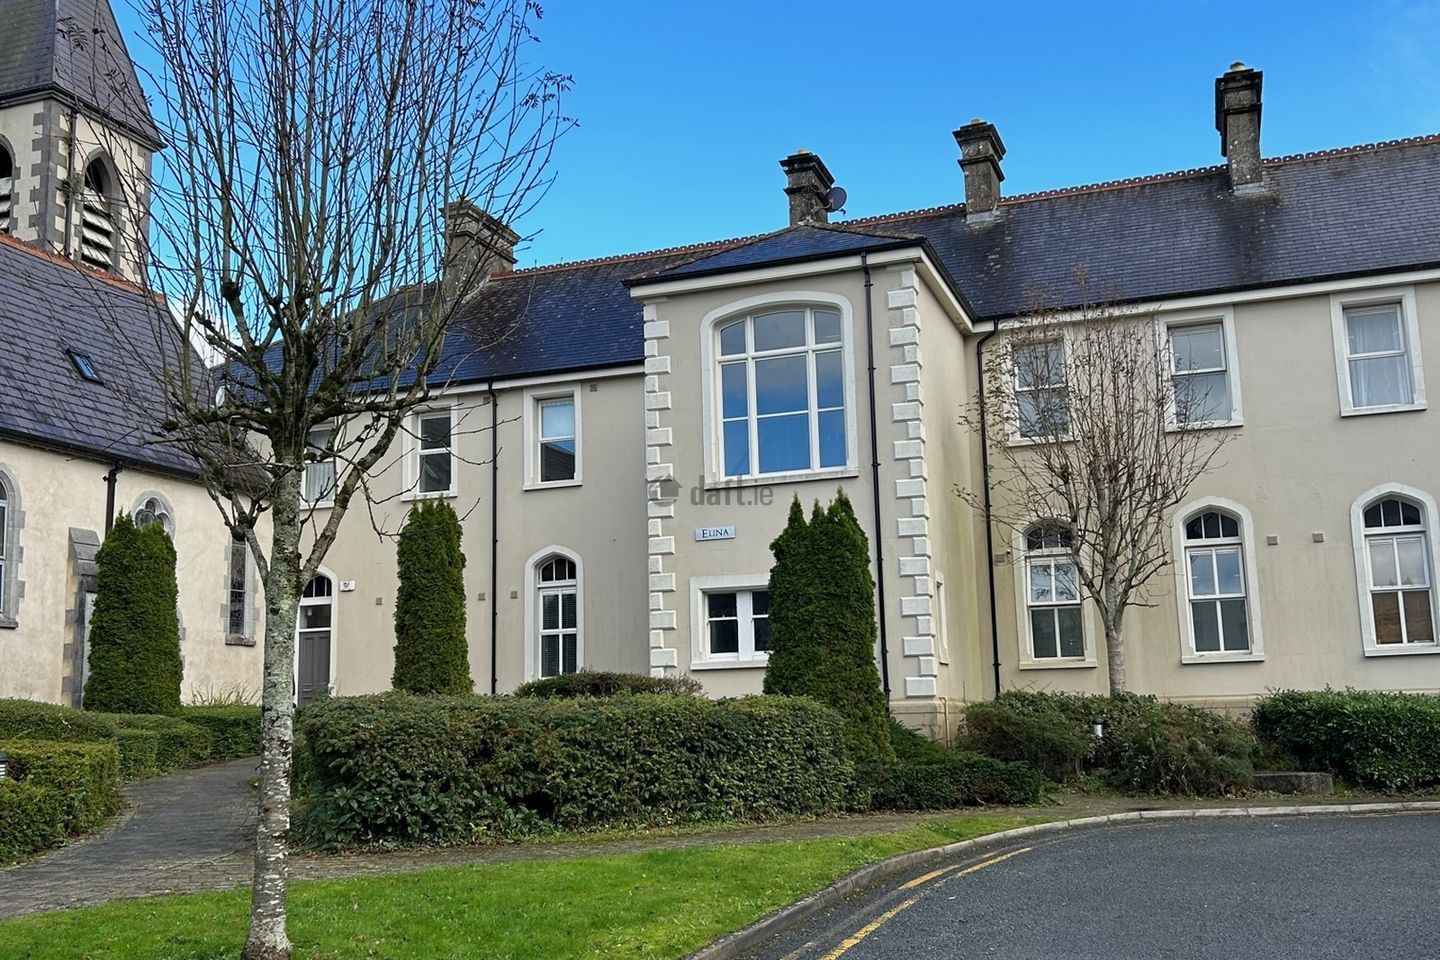 2 Elina, The Courtyard, Newtownforbes, Co. Longford